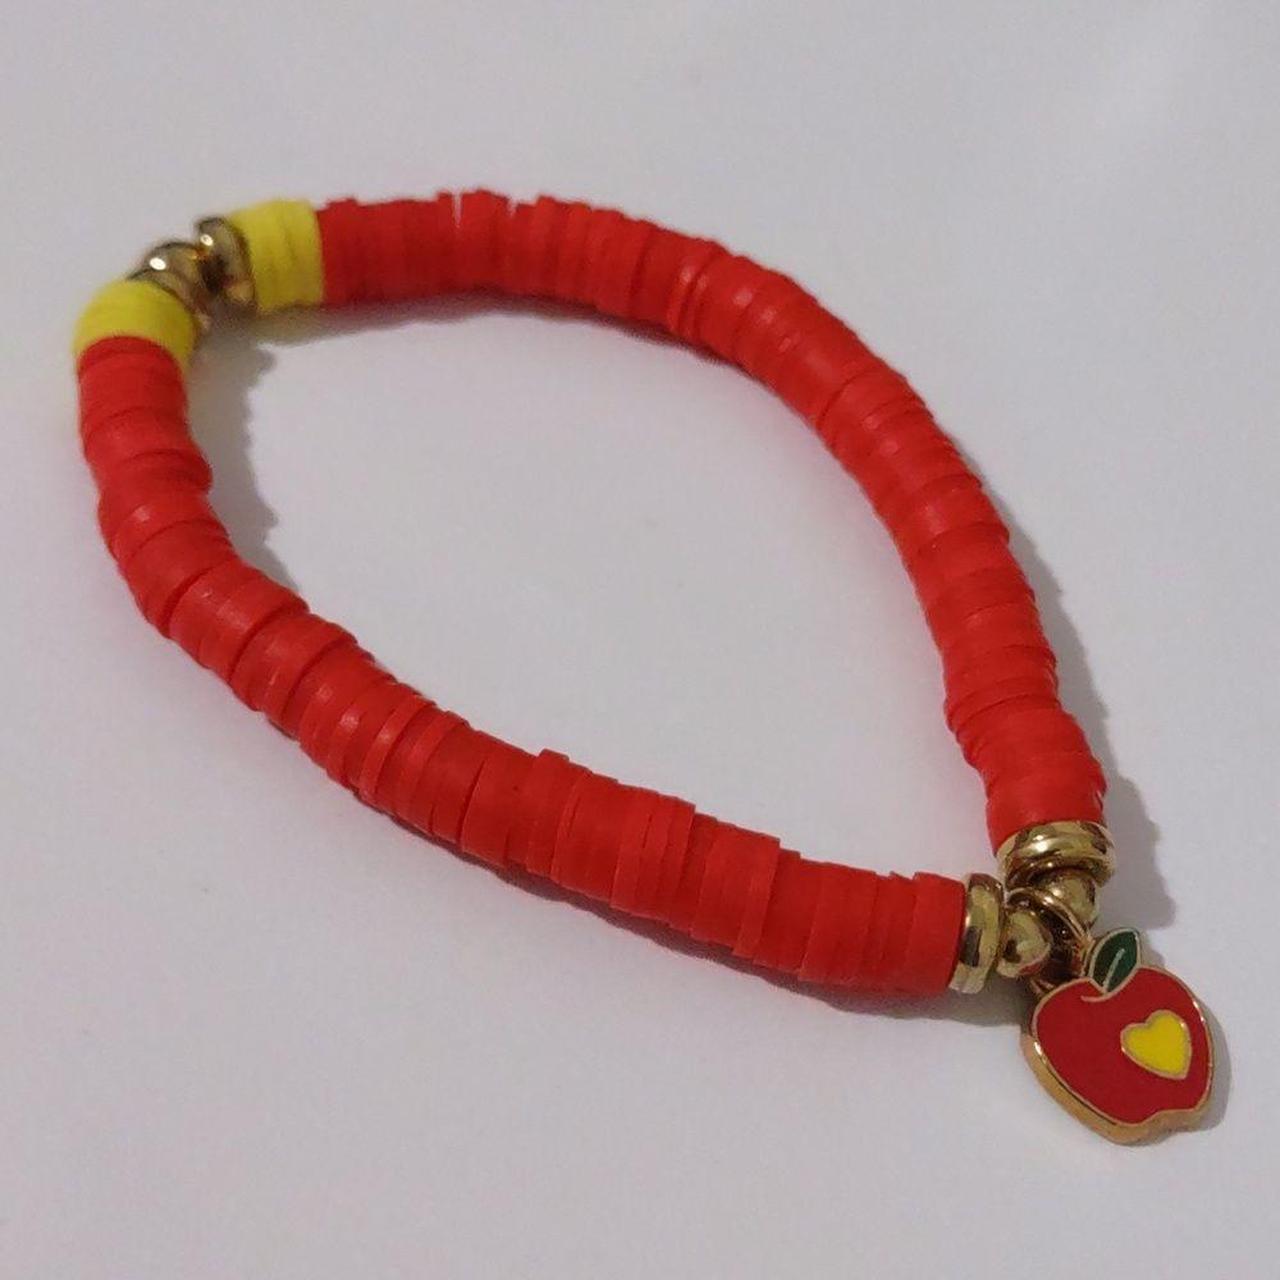 Women's Red and Yellow Clay Beads with Apple Charm - Depop